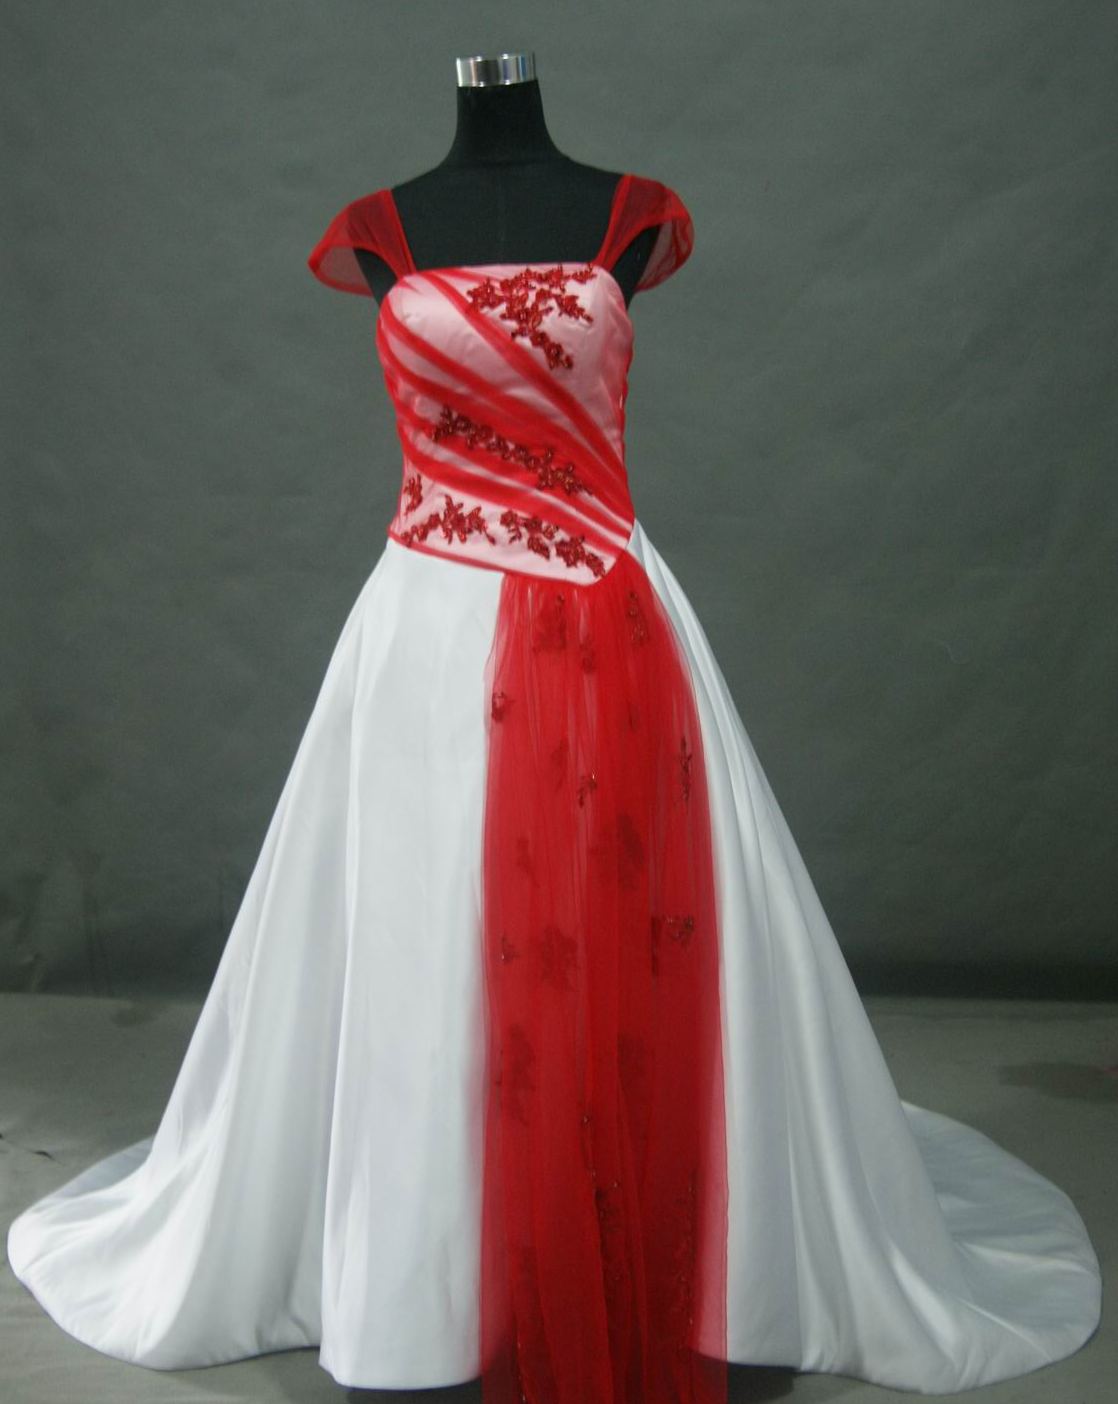 Red and white wedding dress with cap sleeves.